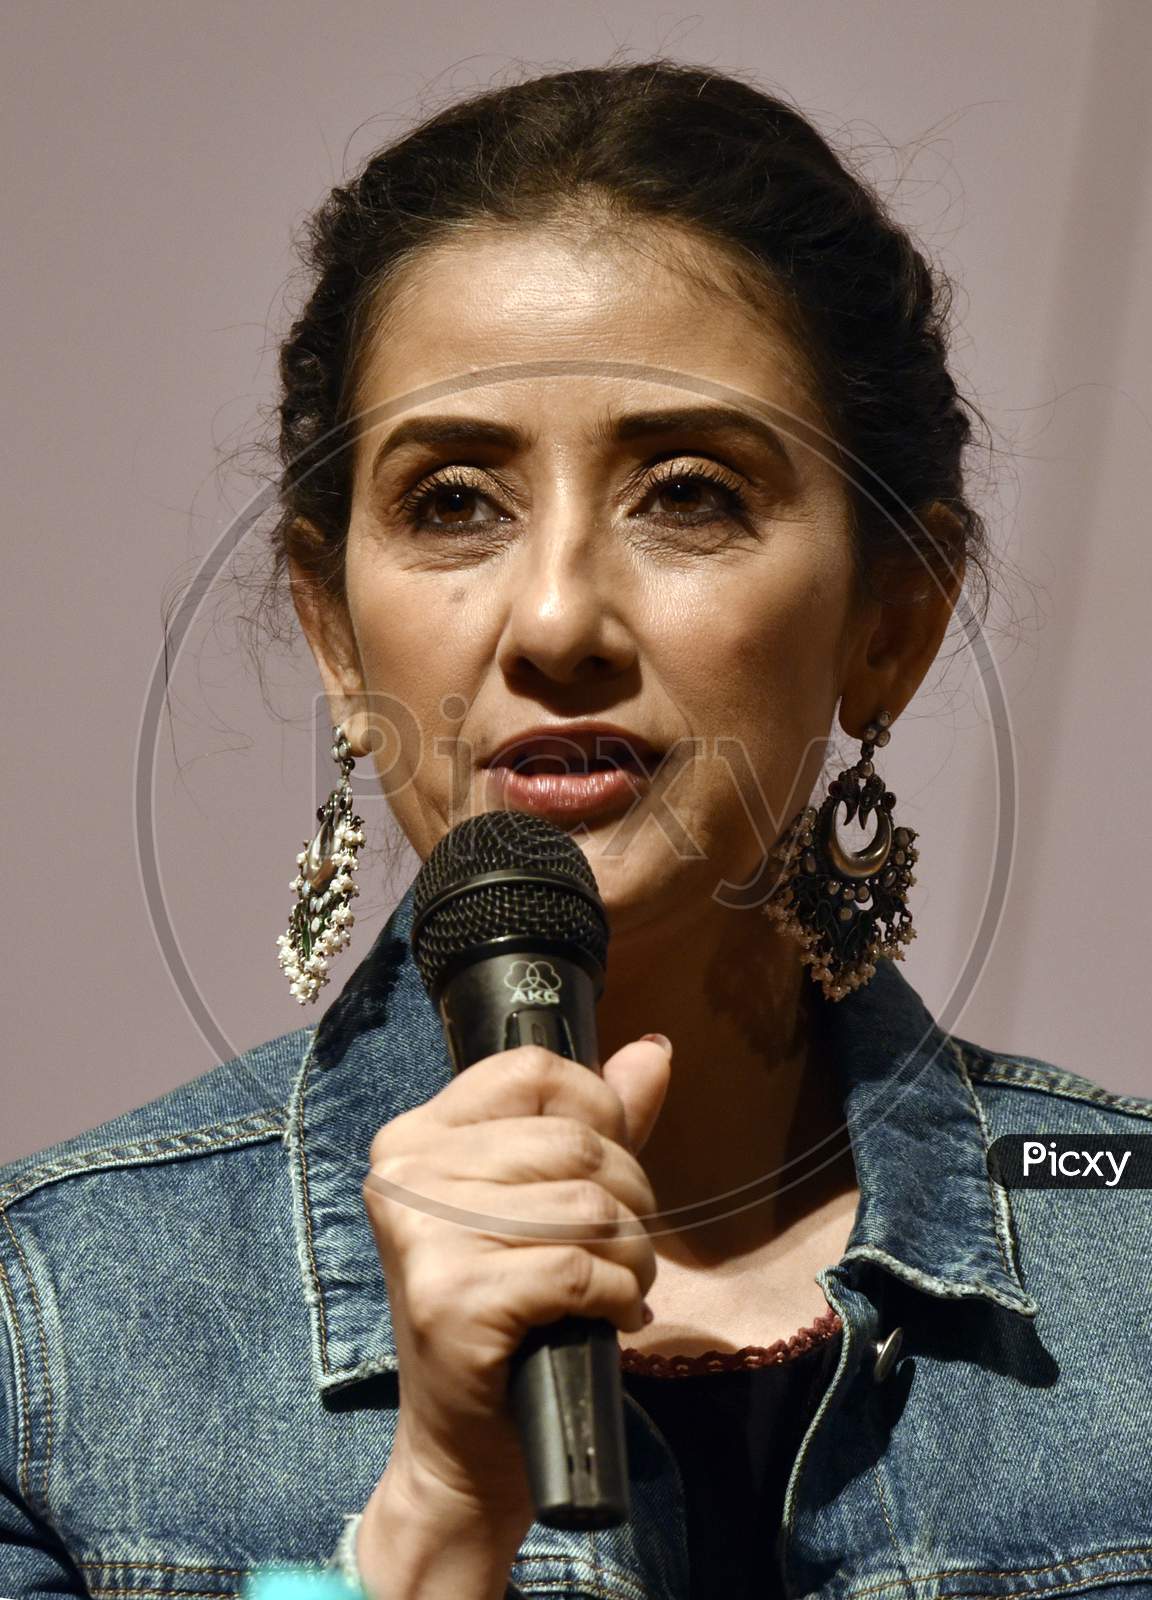 Bollywood Actress Manisha Koirala During 3Rd Brahmaputra Literary Festival, Organised By Publication Board Assam And Supported By The Assam Government At Sankardev Kalakhetra In Guwahati, Assam